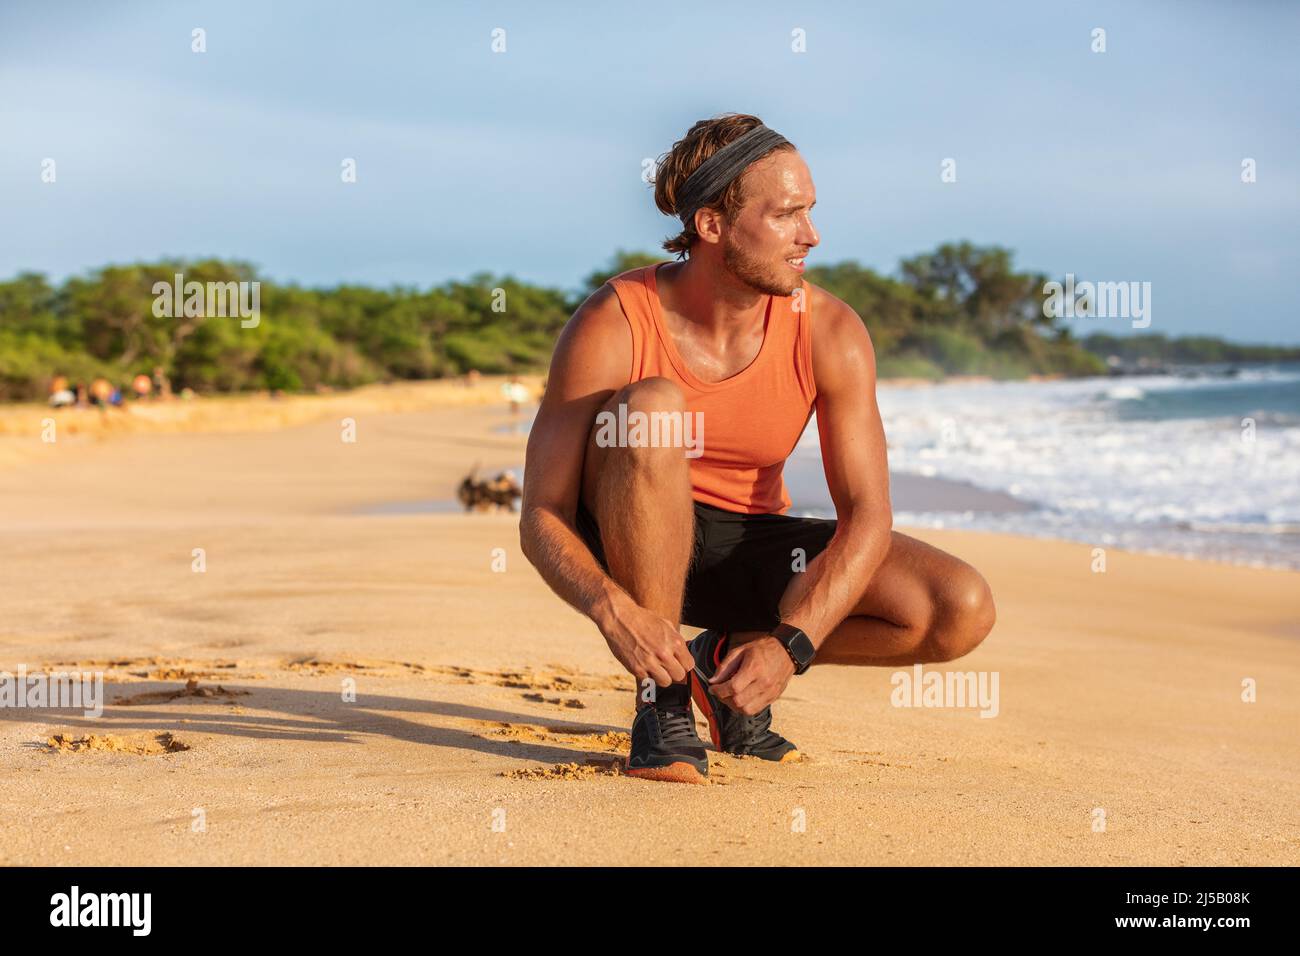 Smartwatch fitness runner man tying shoes to run on beach doing summer workout. Healthy active lifestyle running training Stock Photo